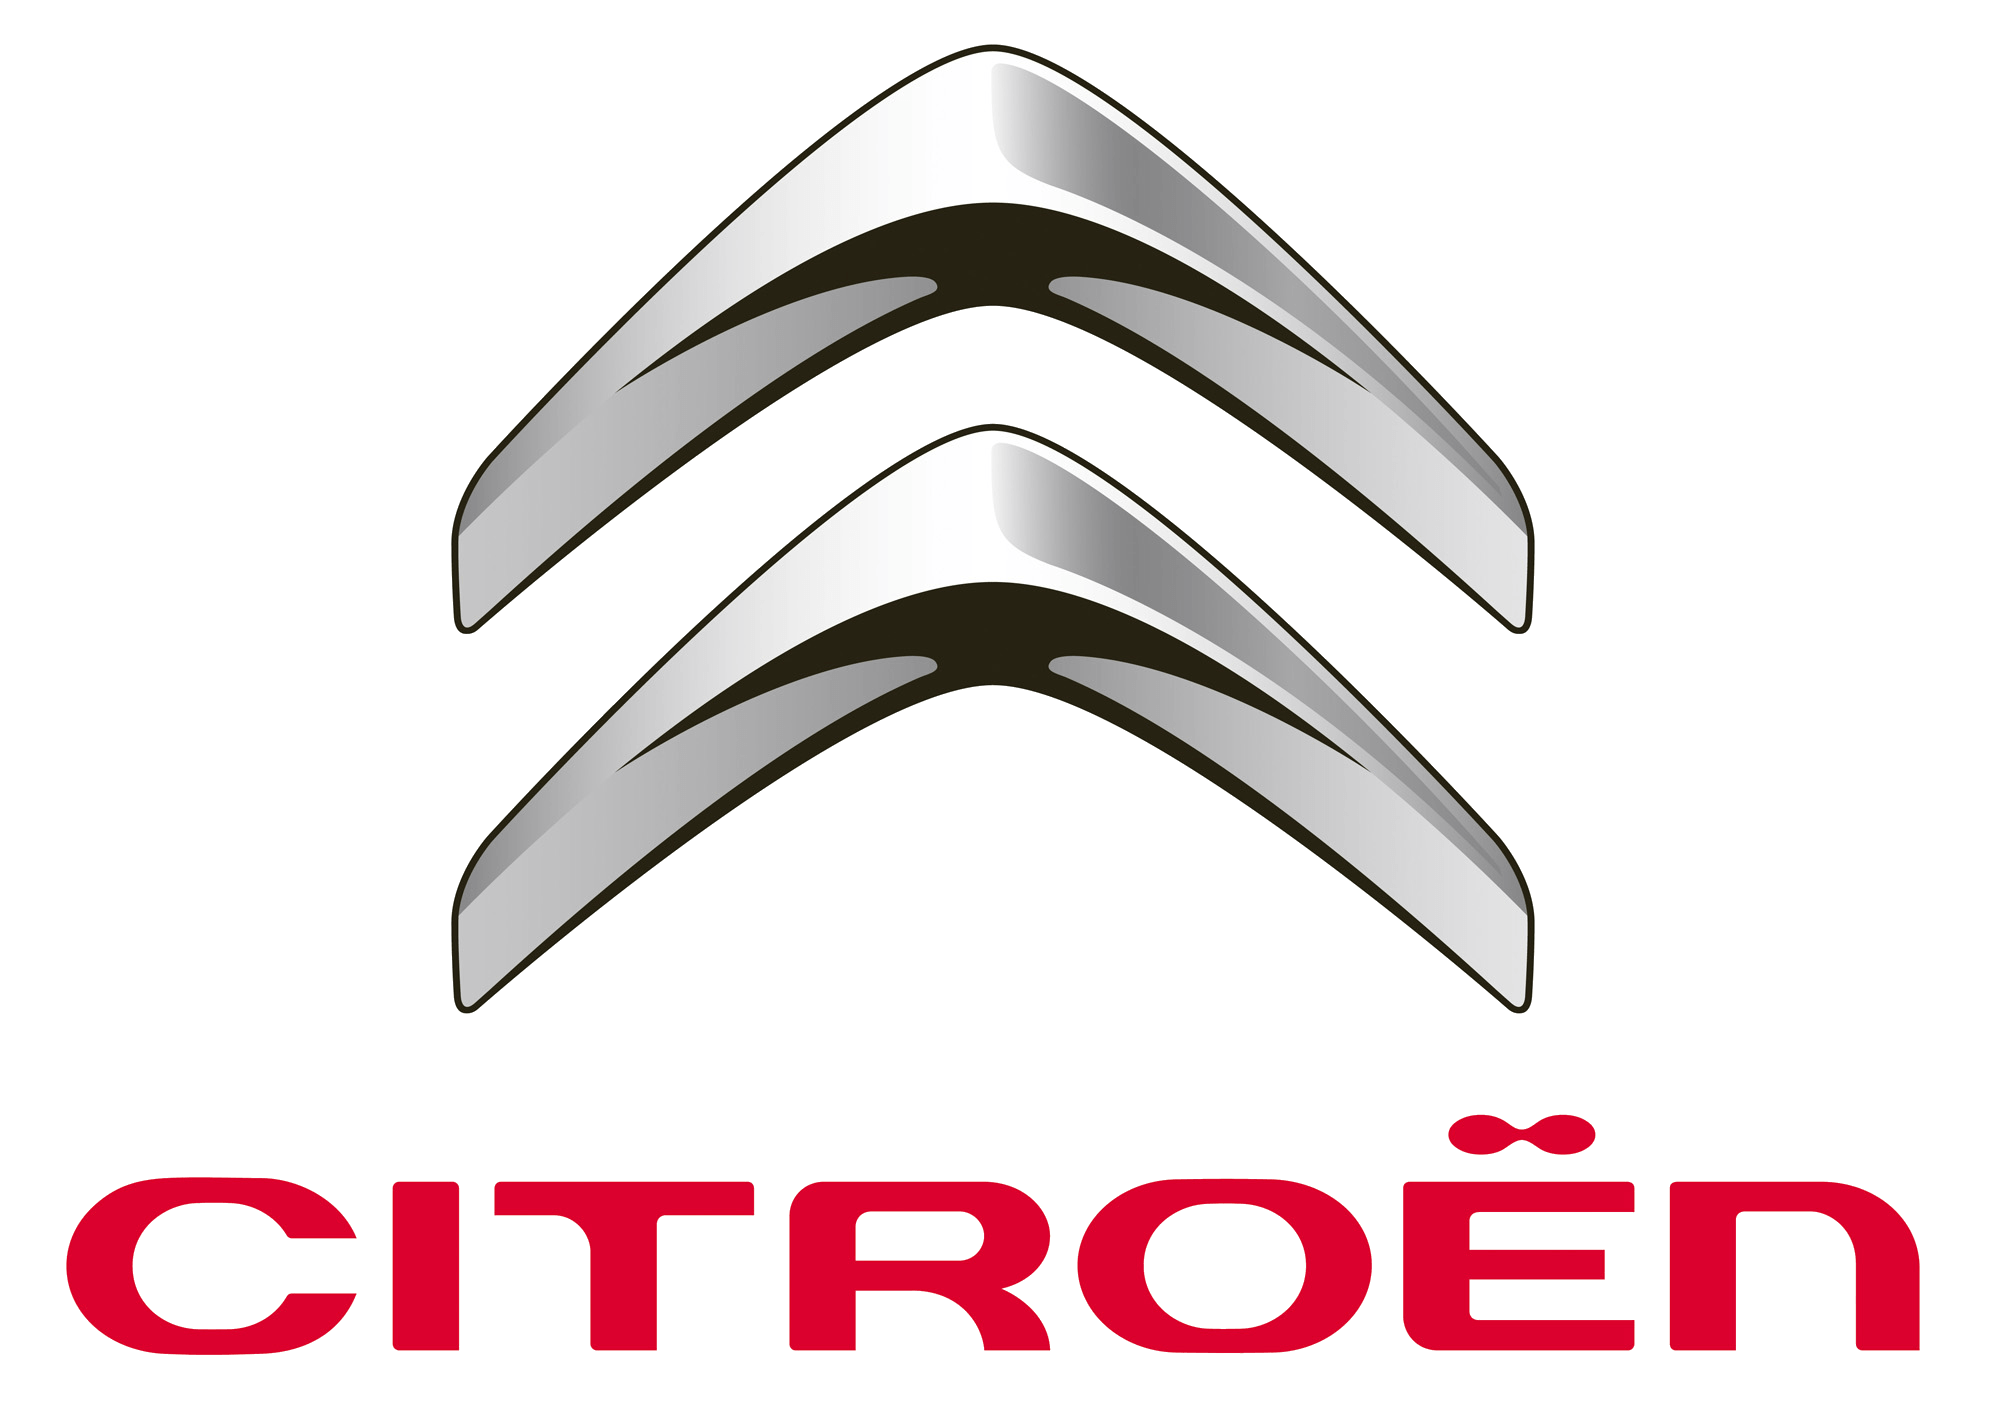 Pointing Down Triangle Car Logo - Citroen Logo, Citroen Car Symbol Meaning and History | Car Brand ...